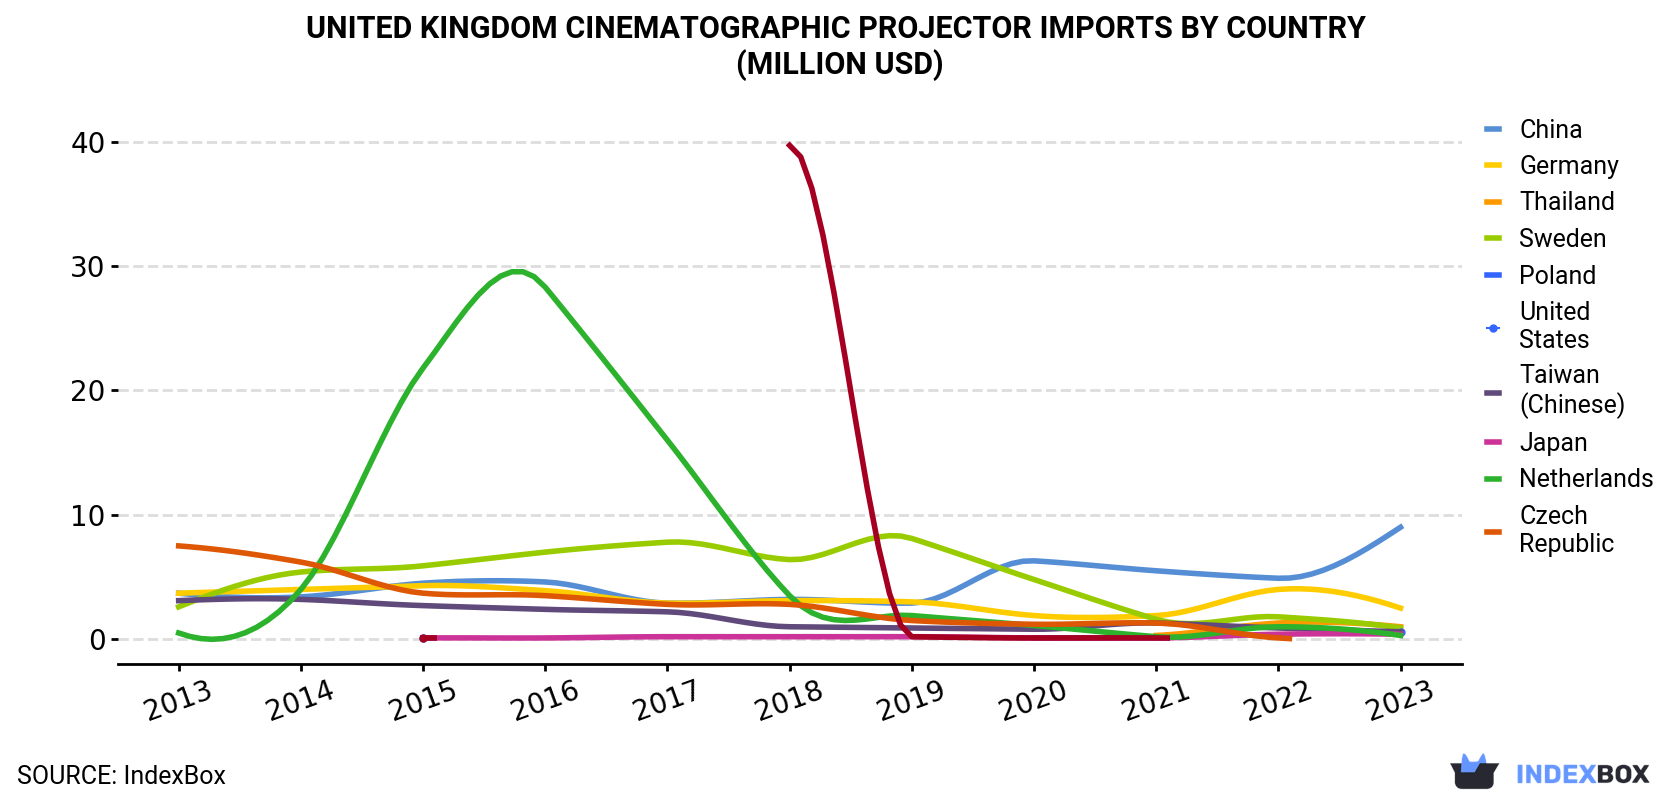 United Kingdom Cinematographic projector Imports By Country (Million USD)